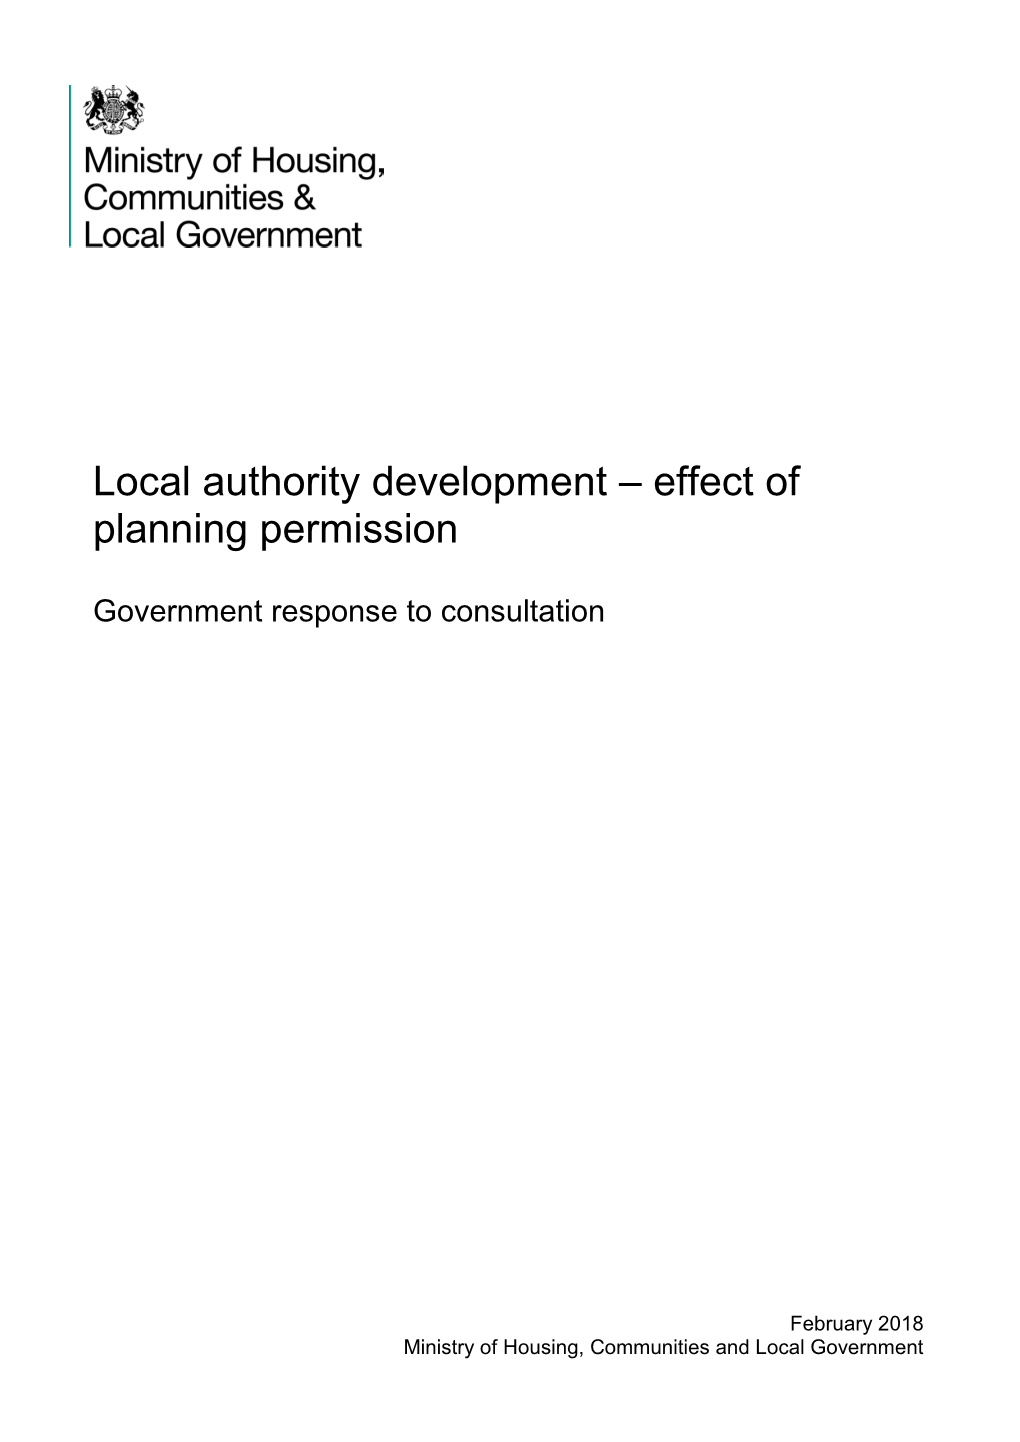 Local Authority Development – Effect of Planning Permission